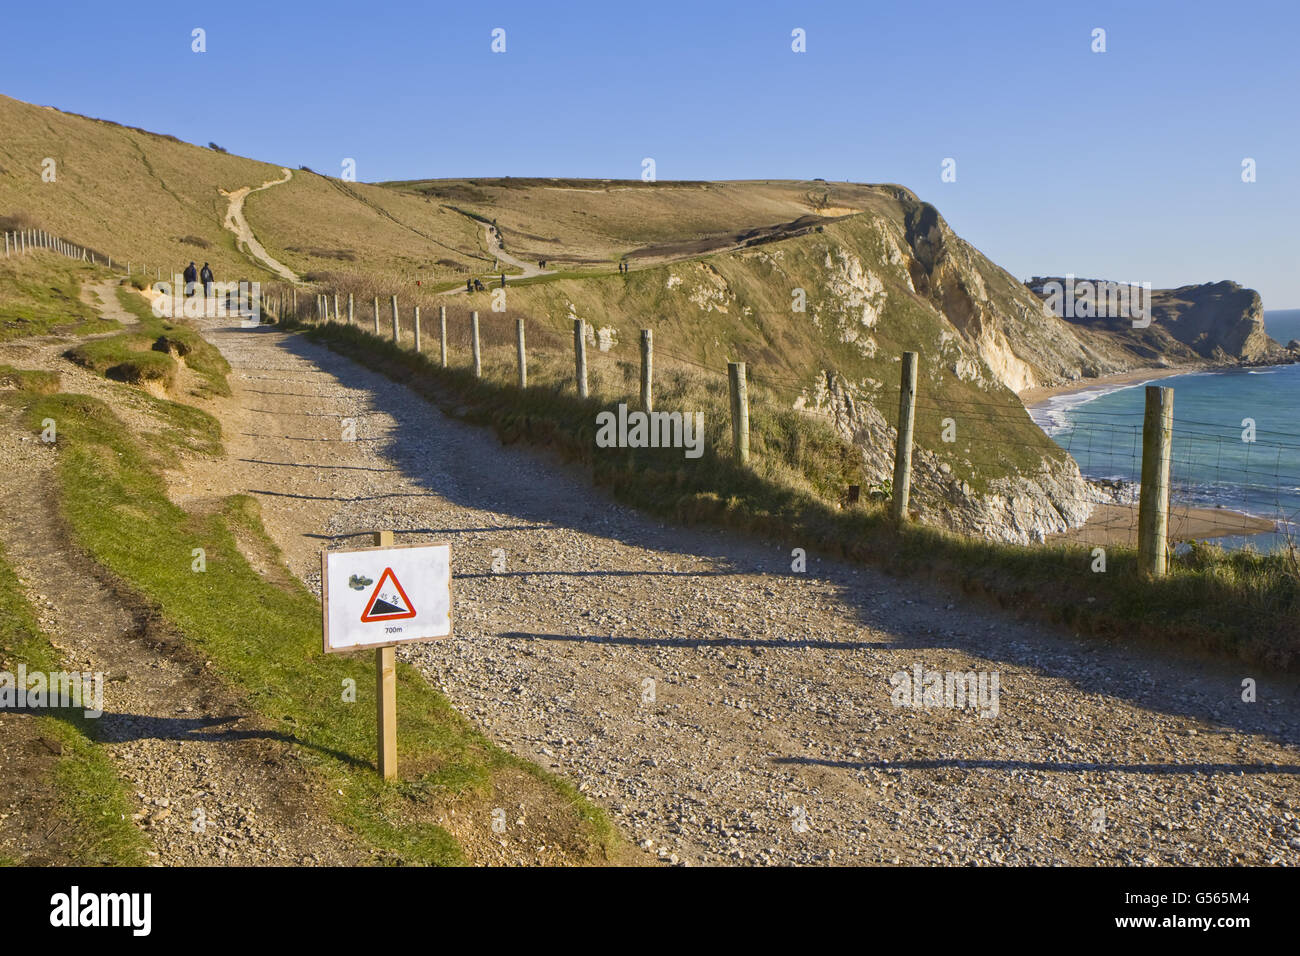 View of coastal footpath and sign warning of 45 degree gradient for walkers, near Durdle Door, Dorset, England, January Stock Photo